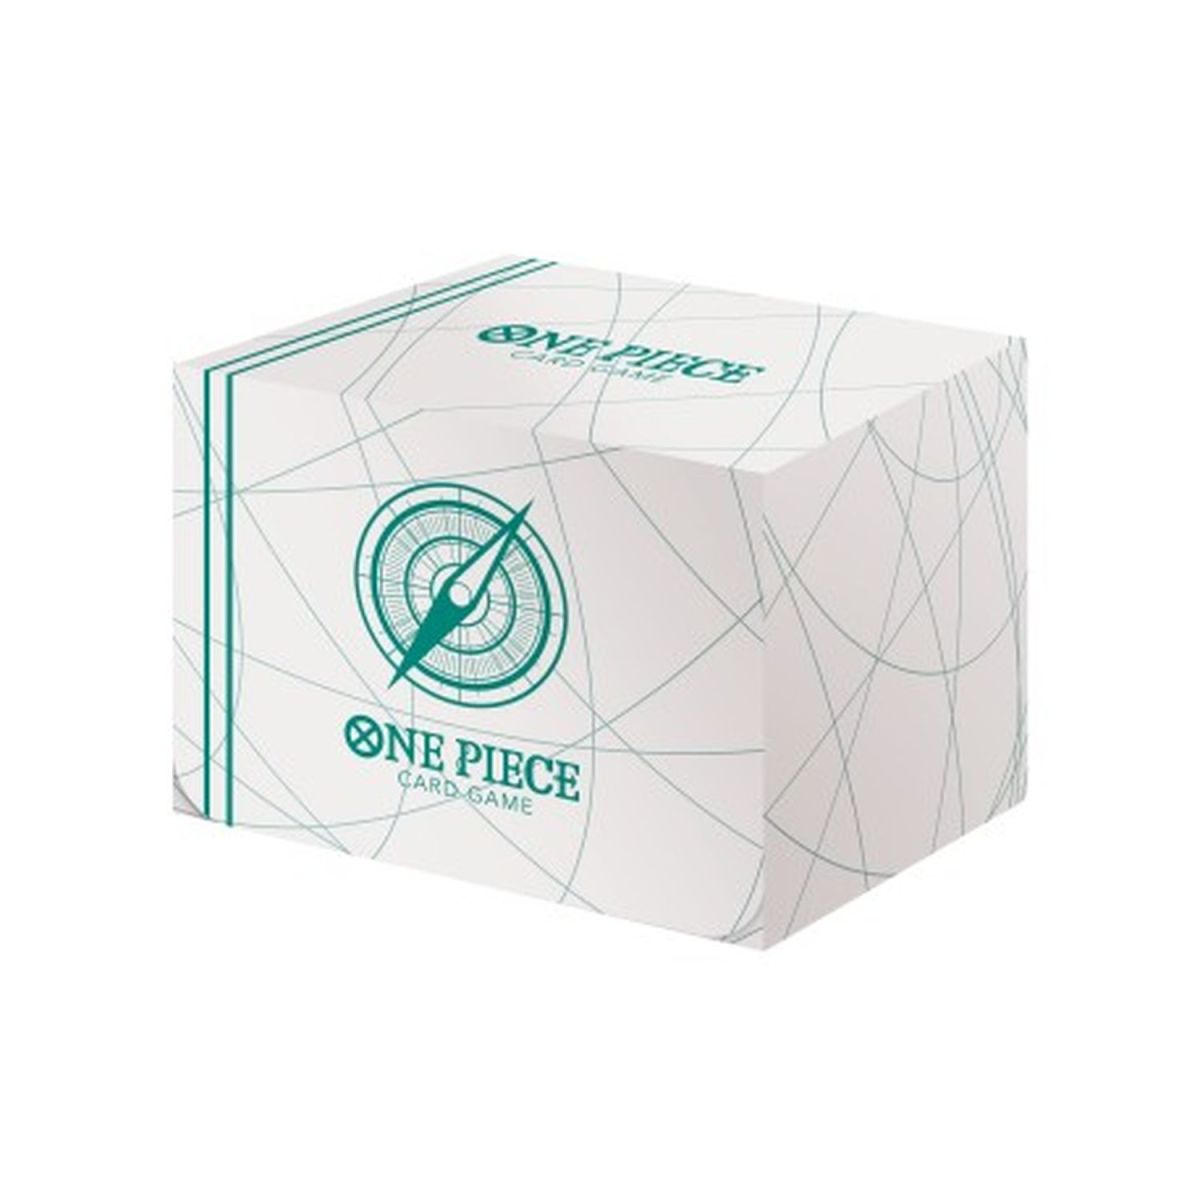 One Piece CG - Deck Box - Clear Card Case - White - Sealed